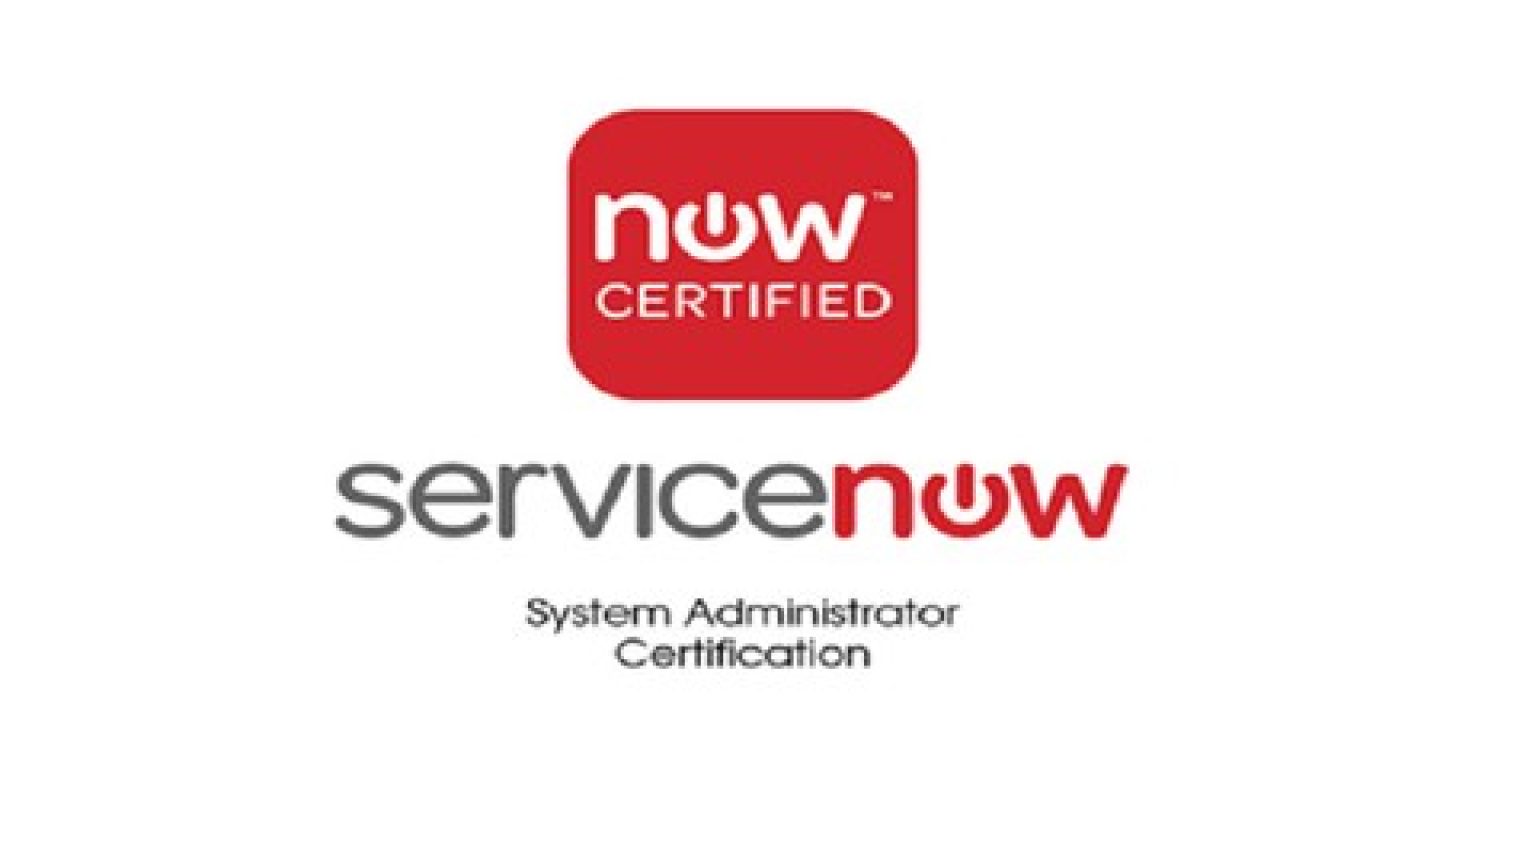 100% OFF ServiceNow Certified System Administrator (CSA) Tests with